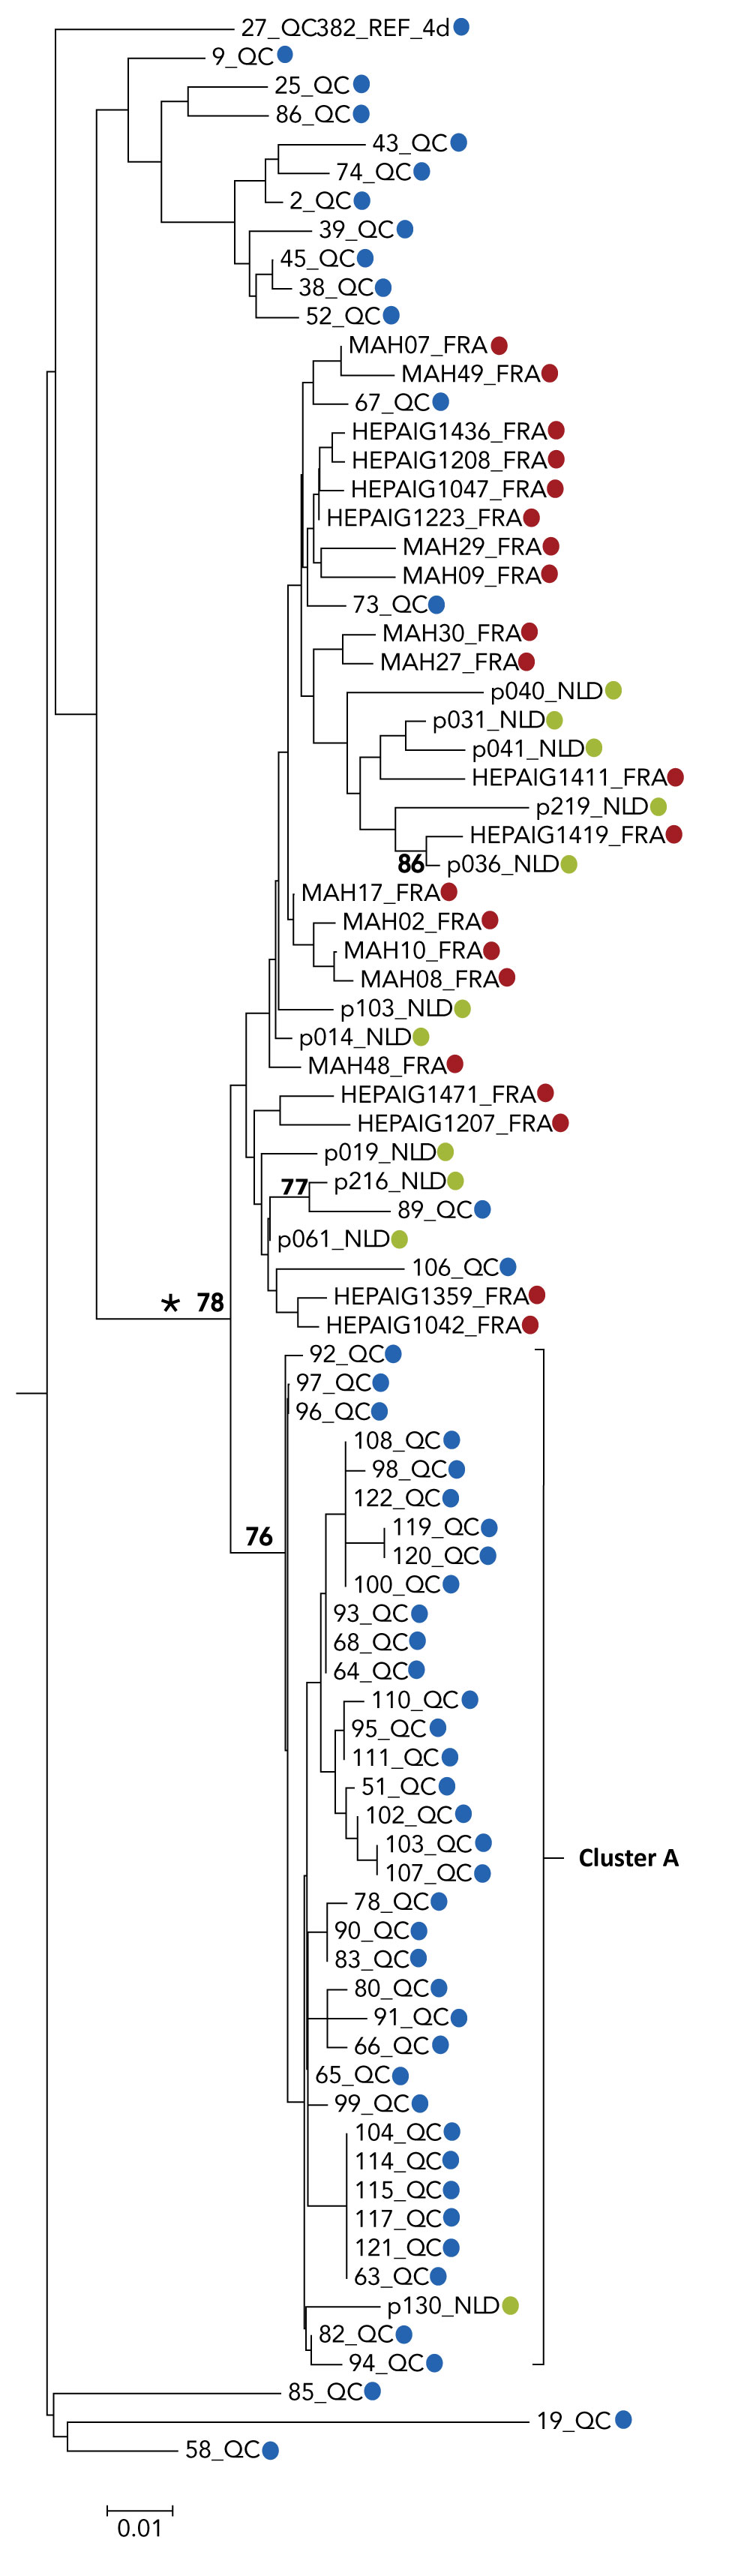 Figure A1: Phylogenetic tree of genotype 4d NS5B hepatitis C virus isolate sequences: cases in Quebec compared to cases in France and the Netherlands